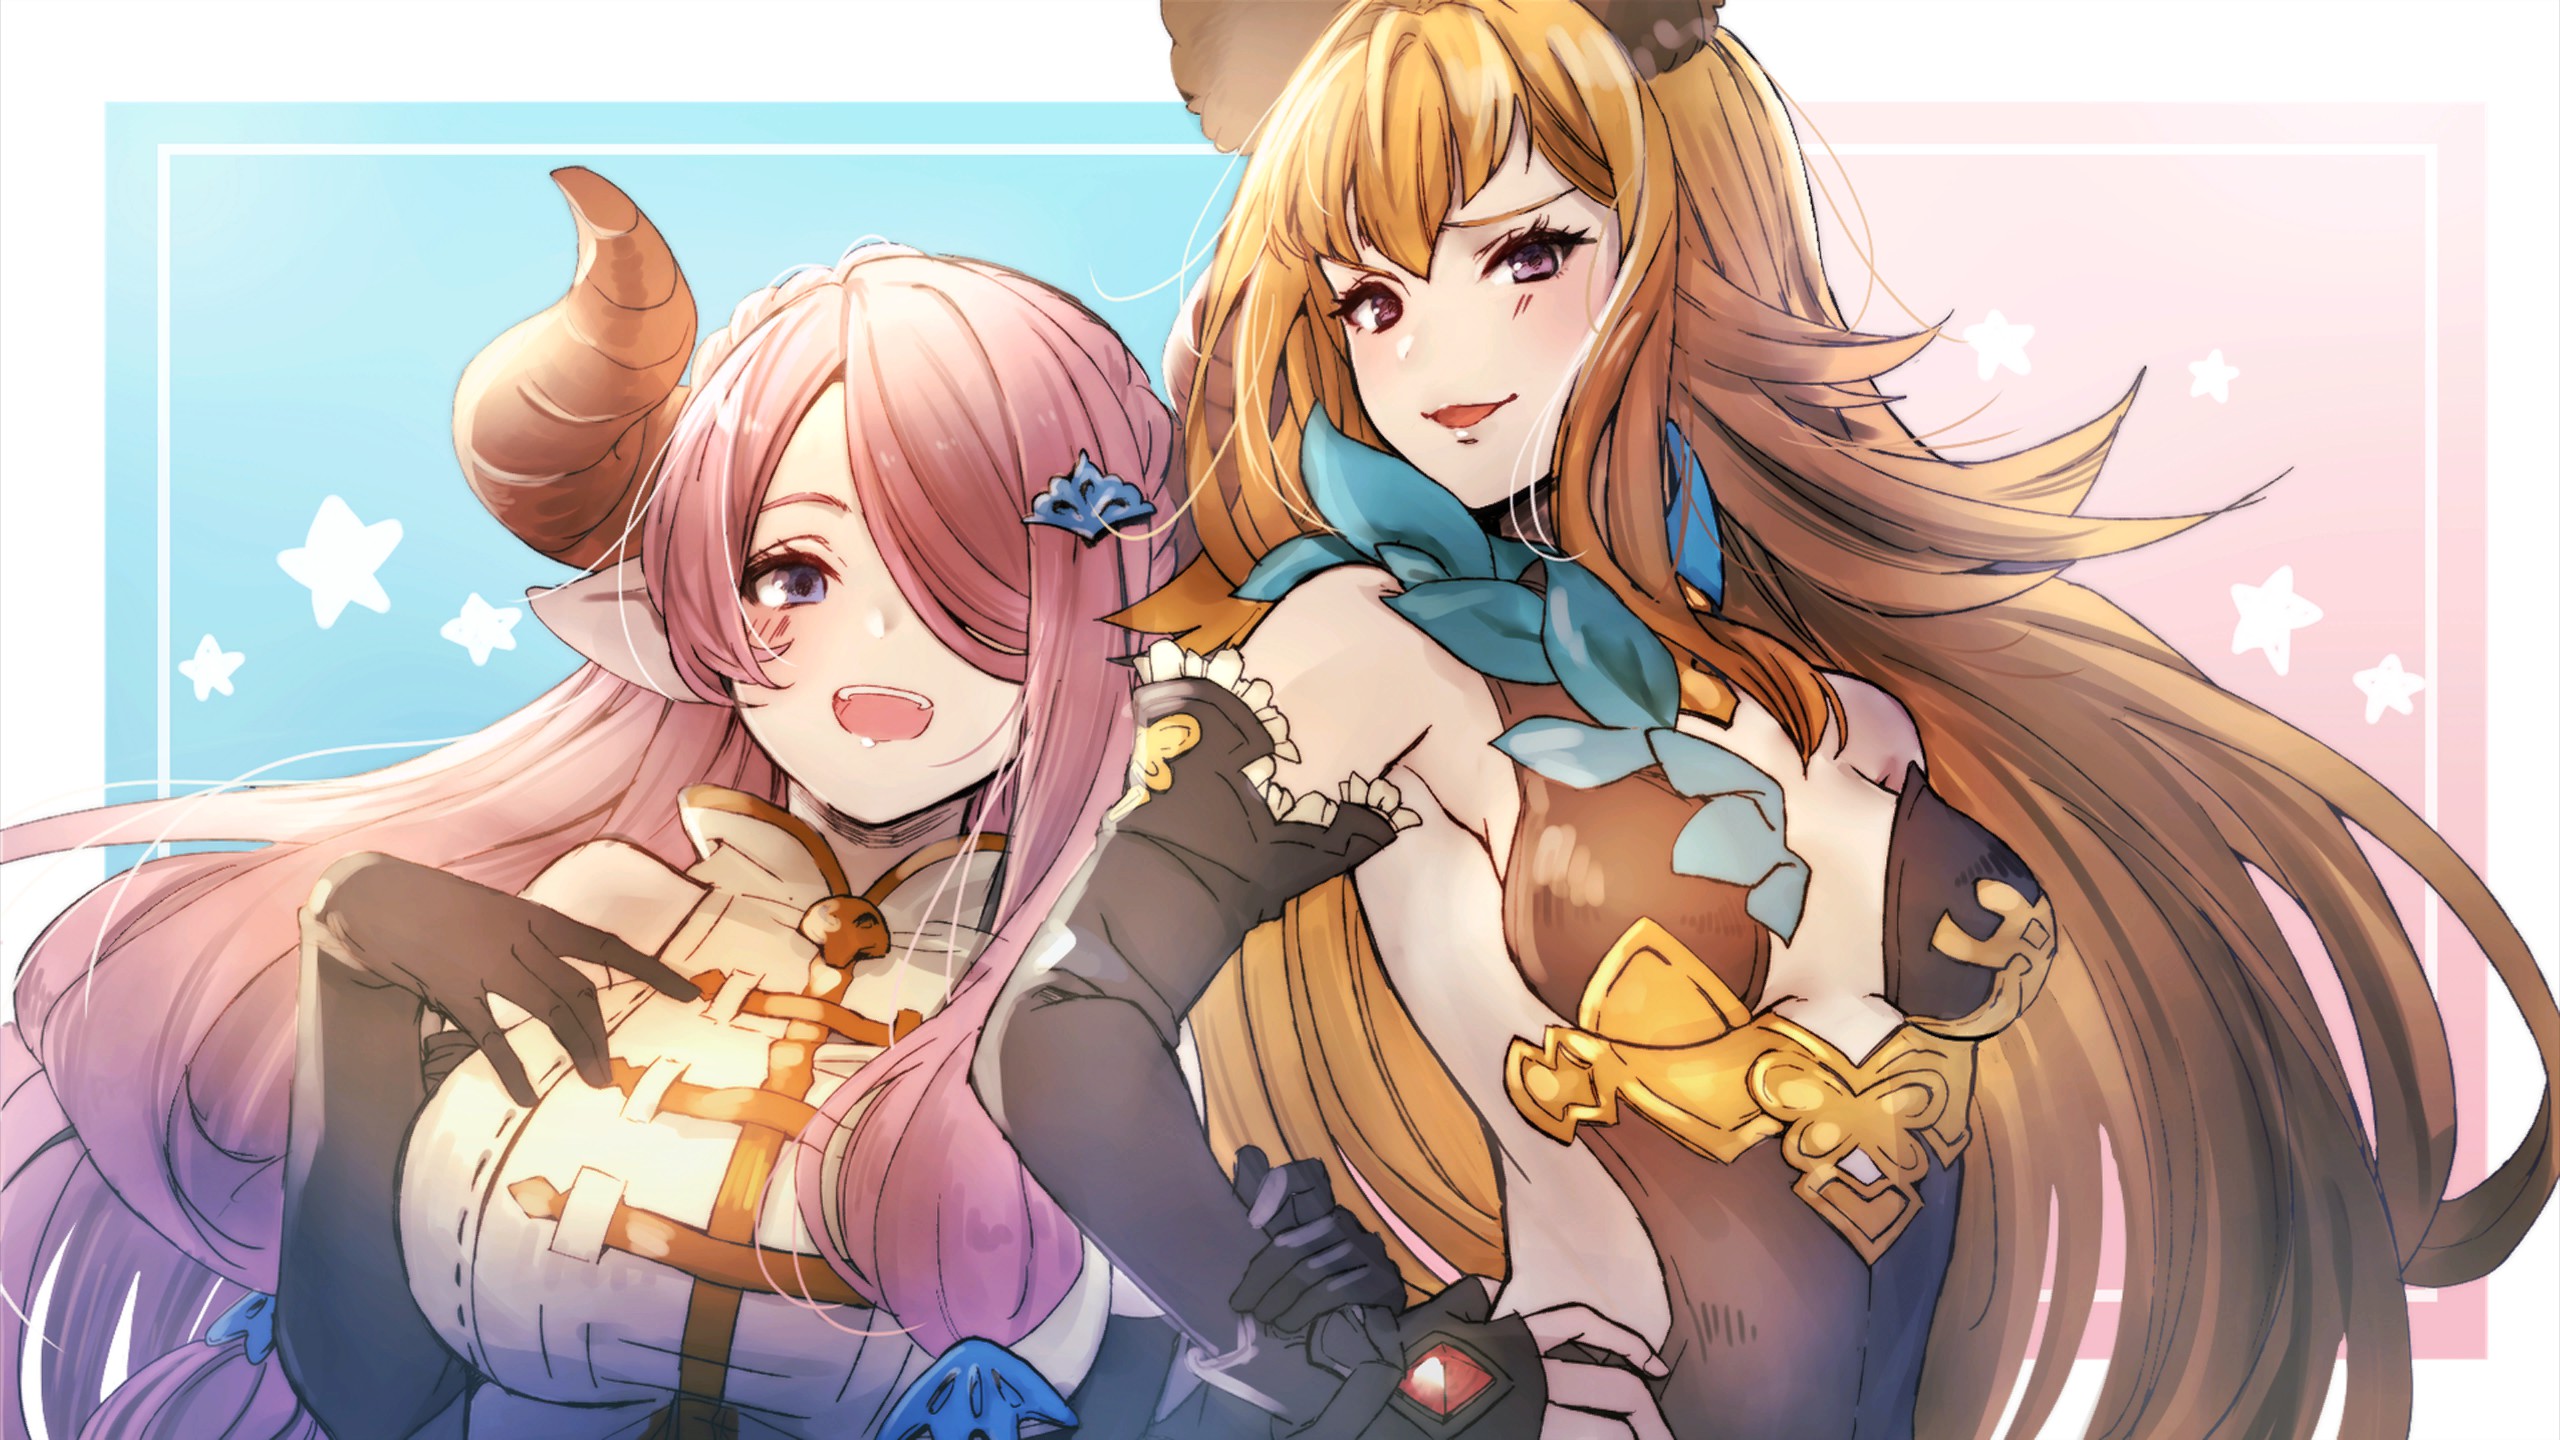 Easiest & Hardest Characters to Learn Tier List in Granblue Fantasy Versus  Rising